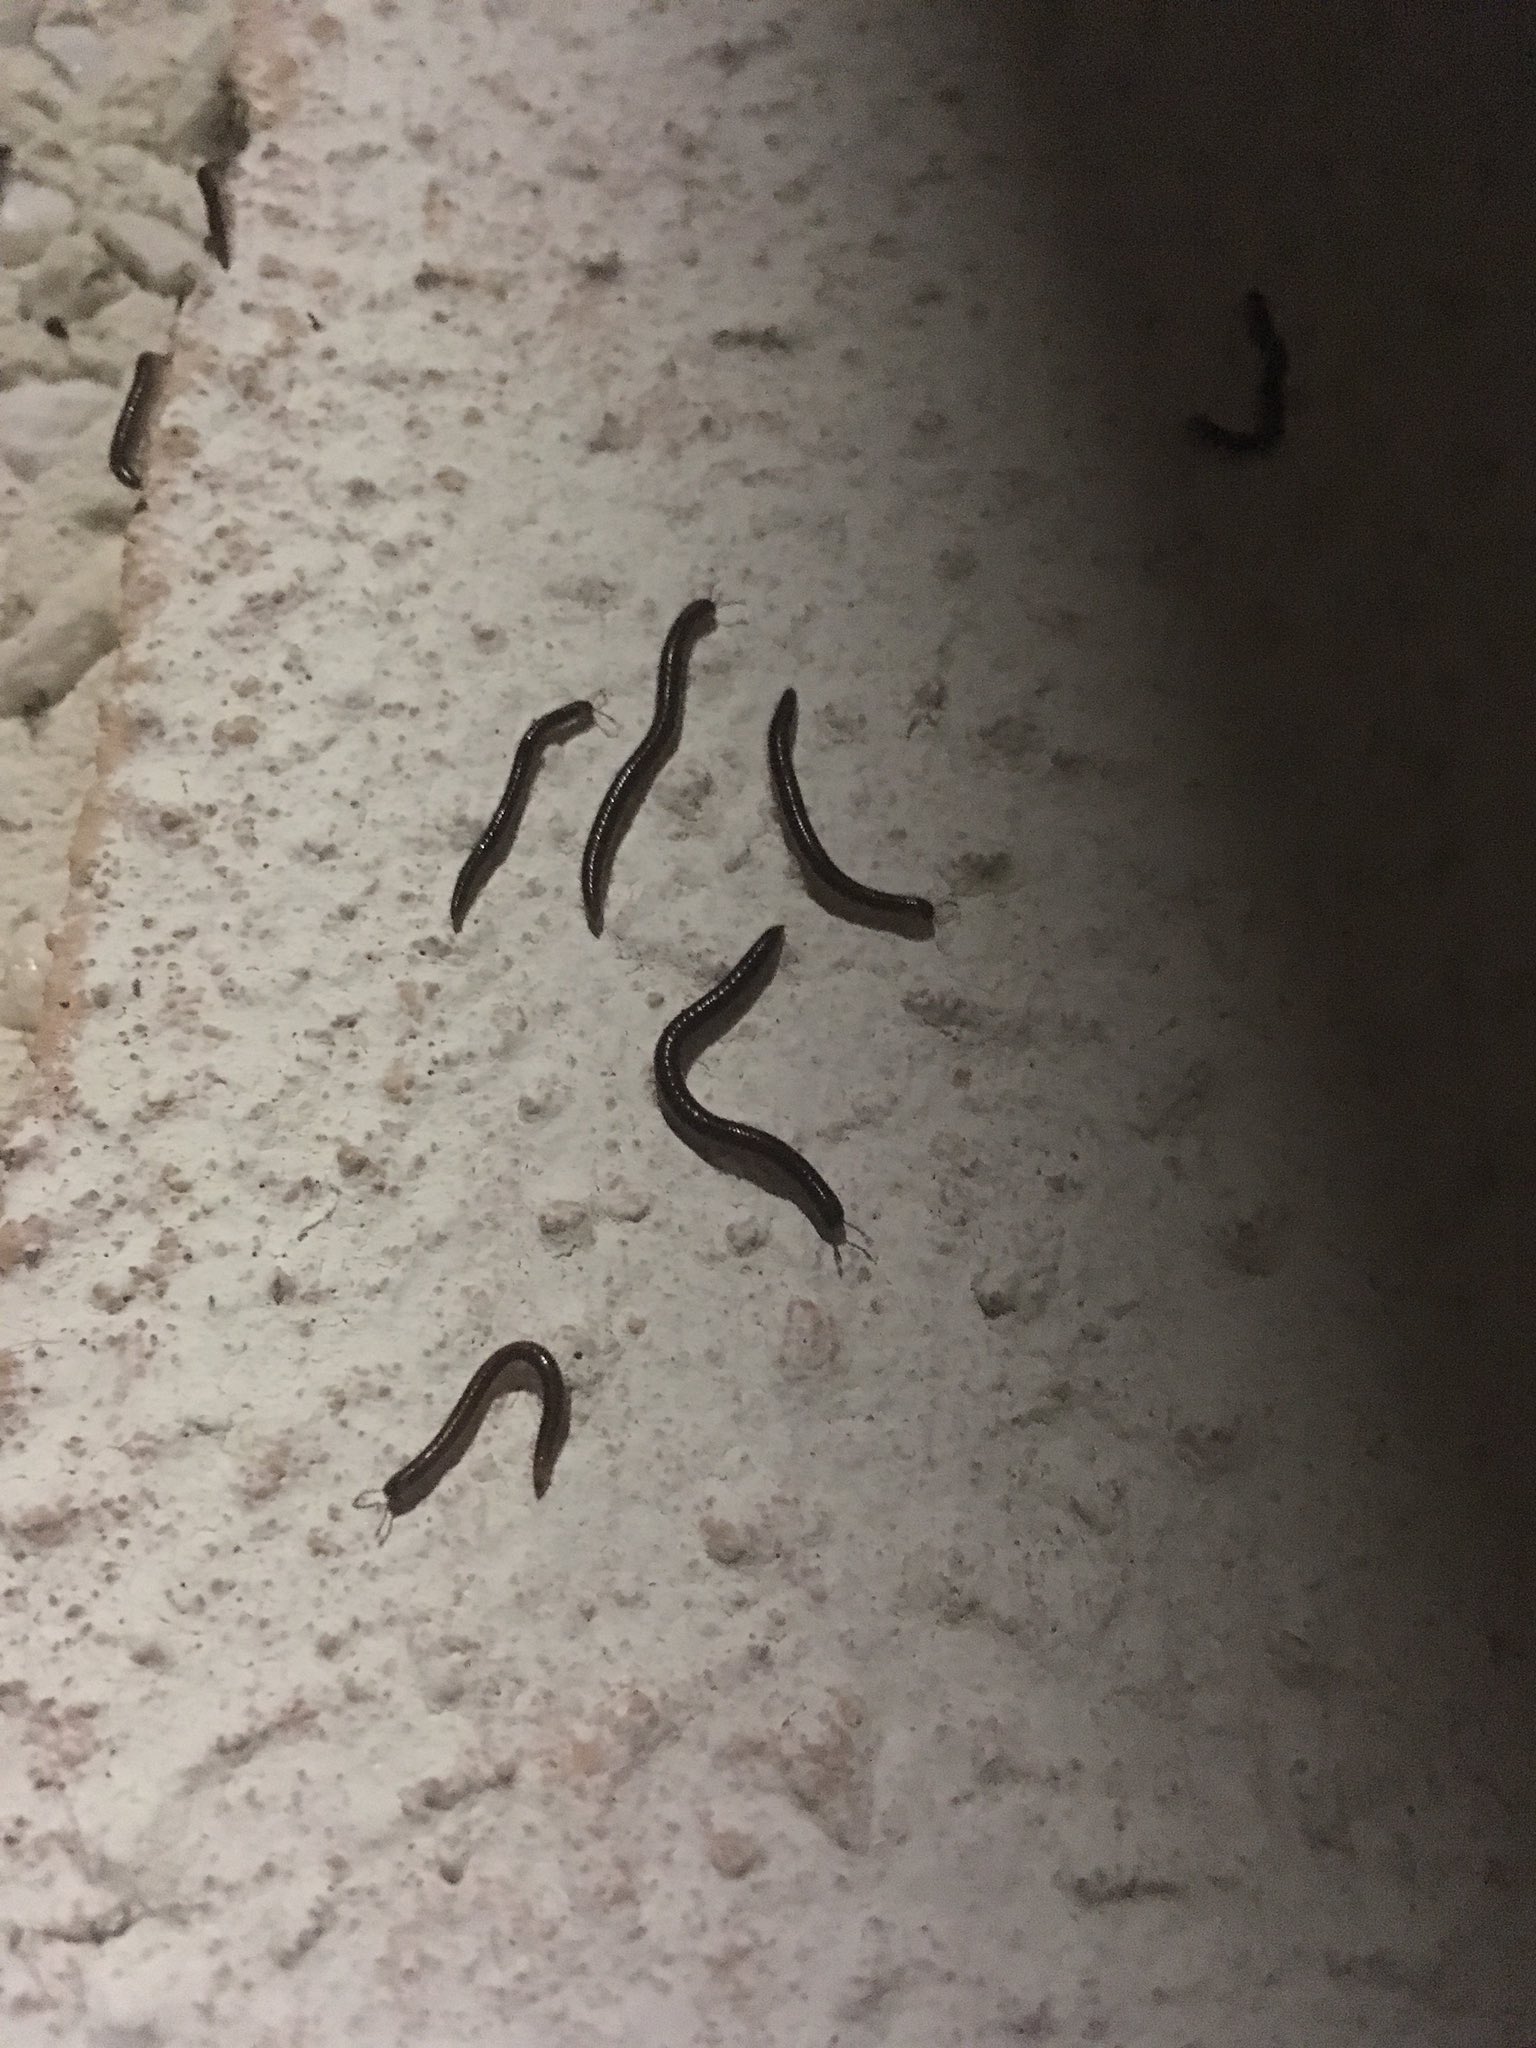 Simon Kelly on X: What are these little #worm #creatures about 4mm long;  can climb up vertical wall, across ceiling & swim? How 2 cull? #PestControl  #domestic  / X